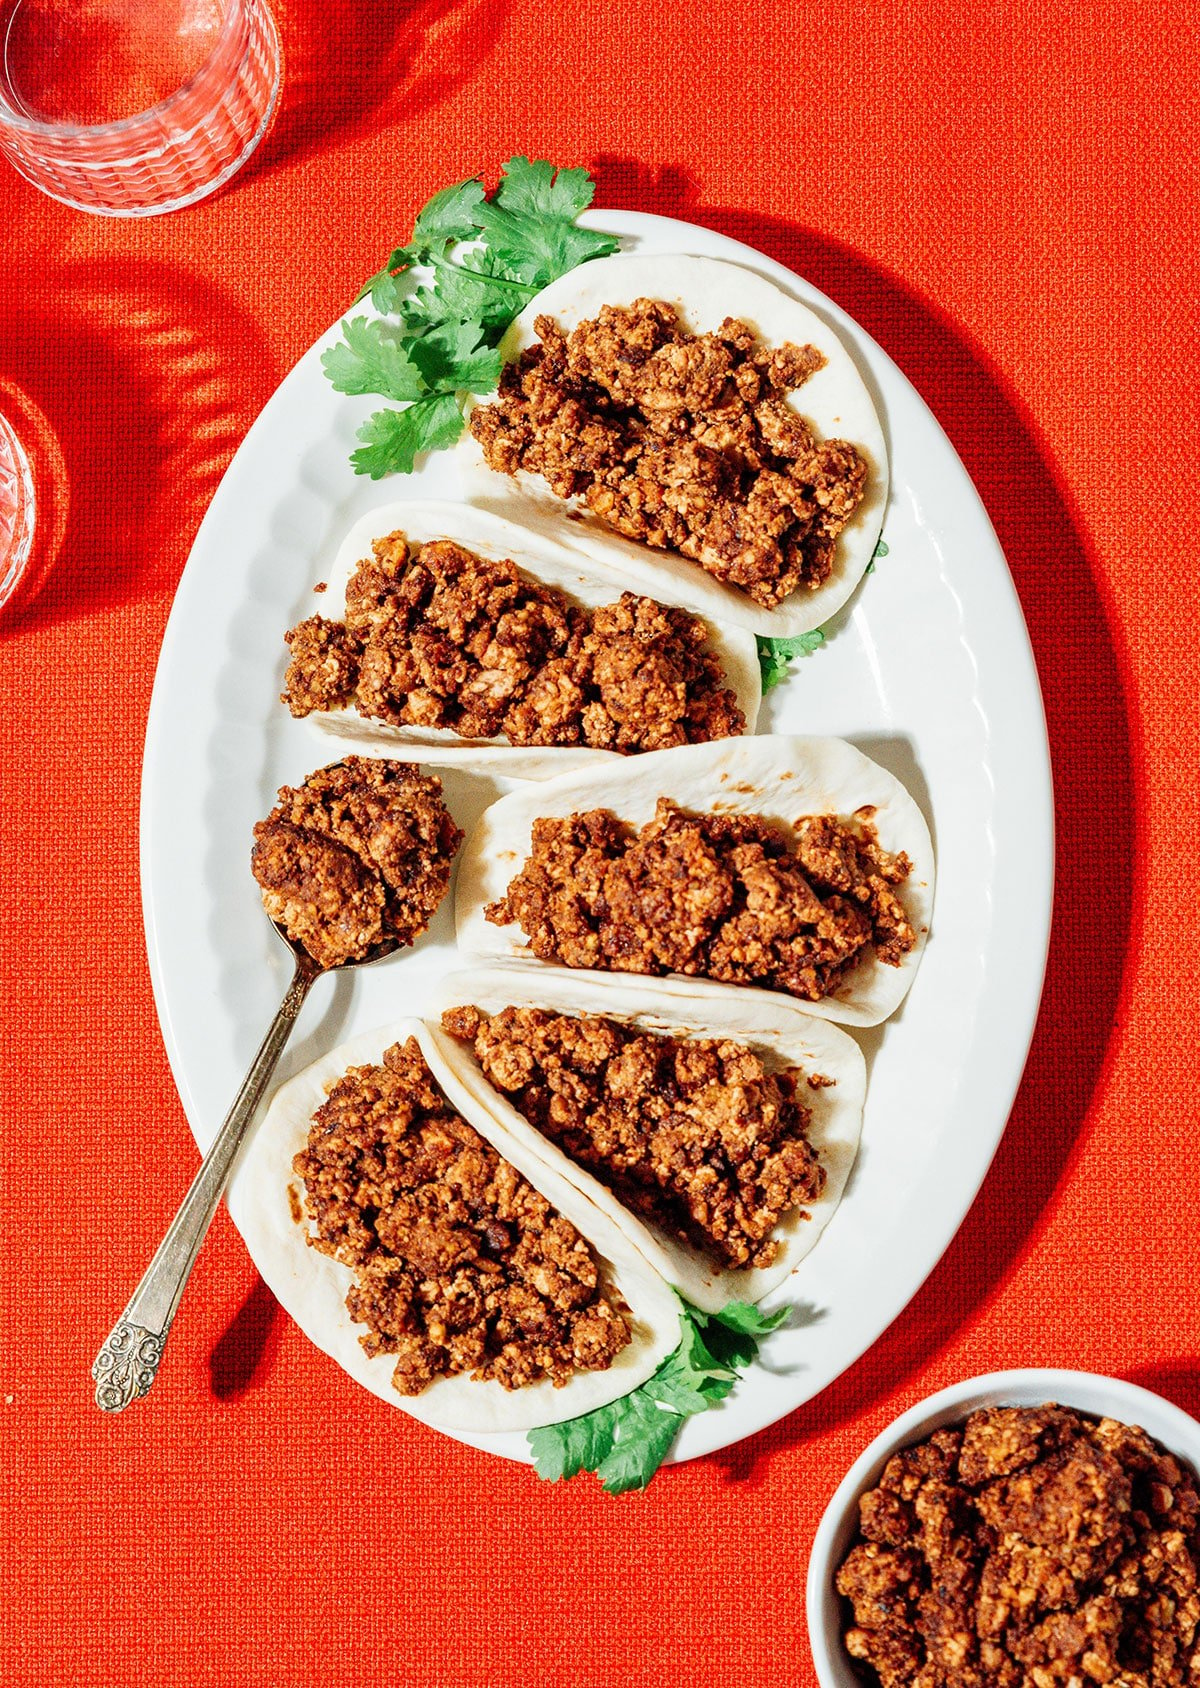 Vegan chorizo in tortillas on a platter with a red table cloth.